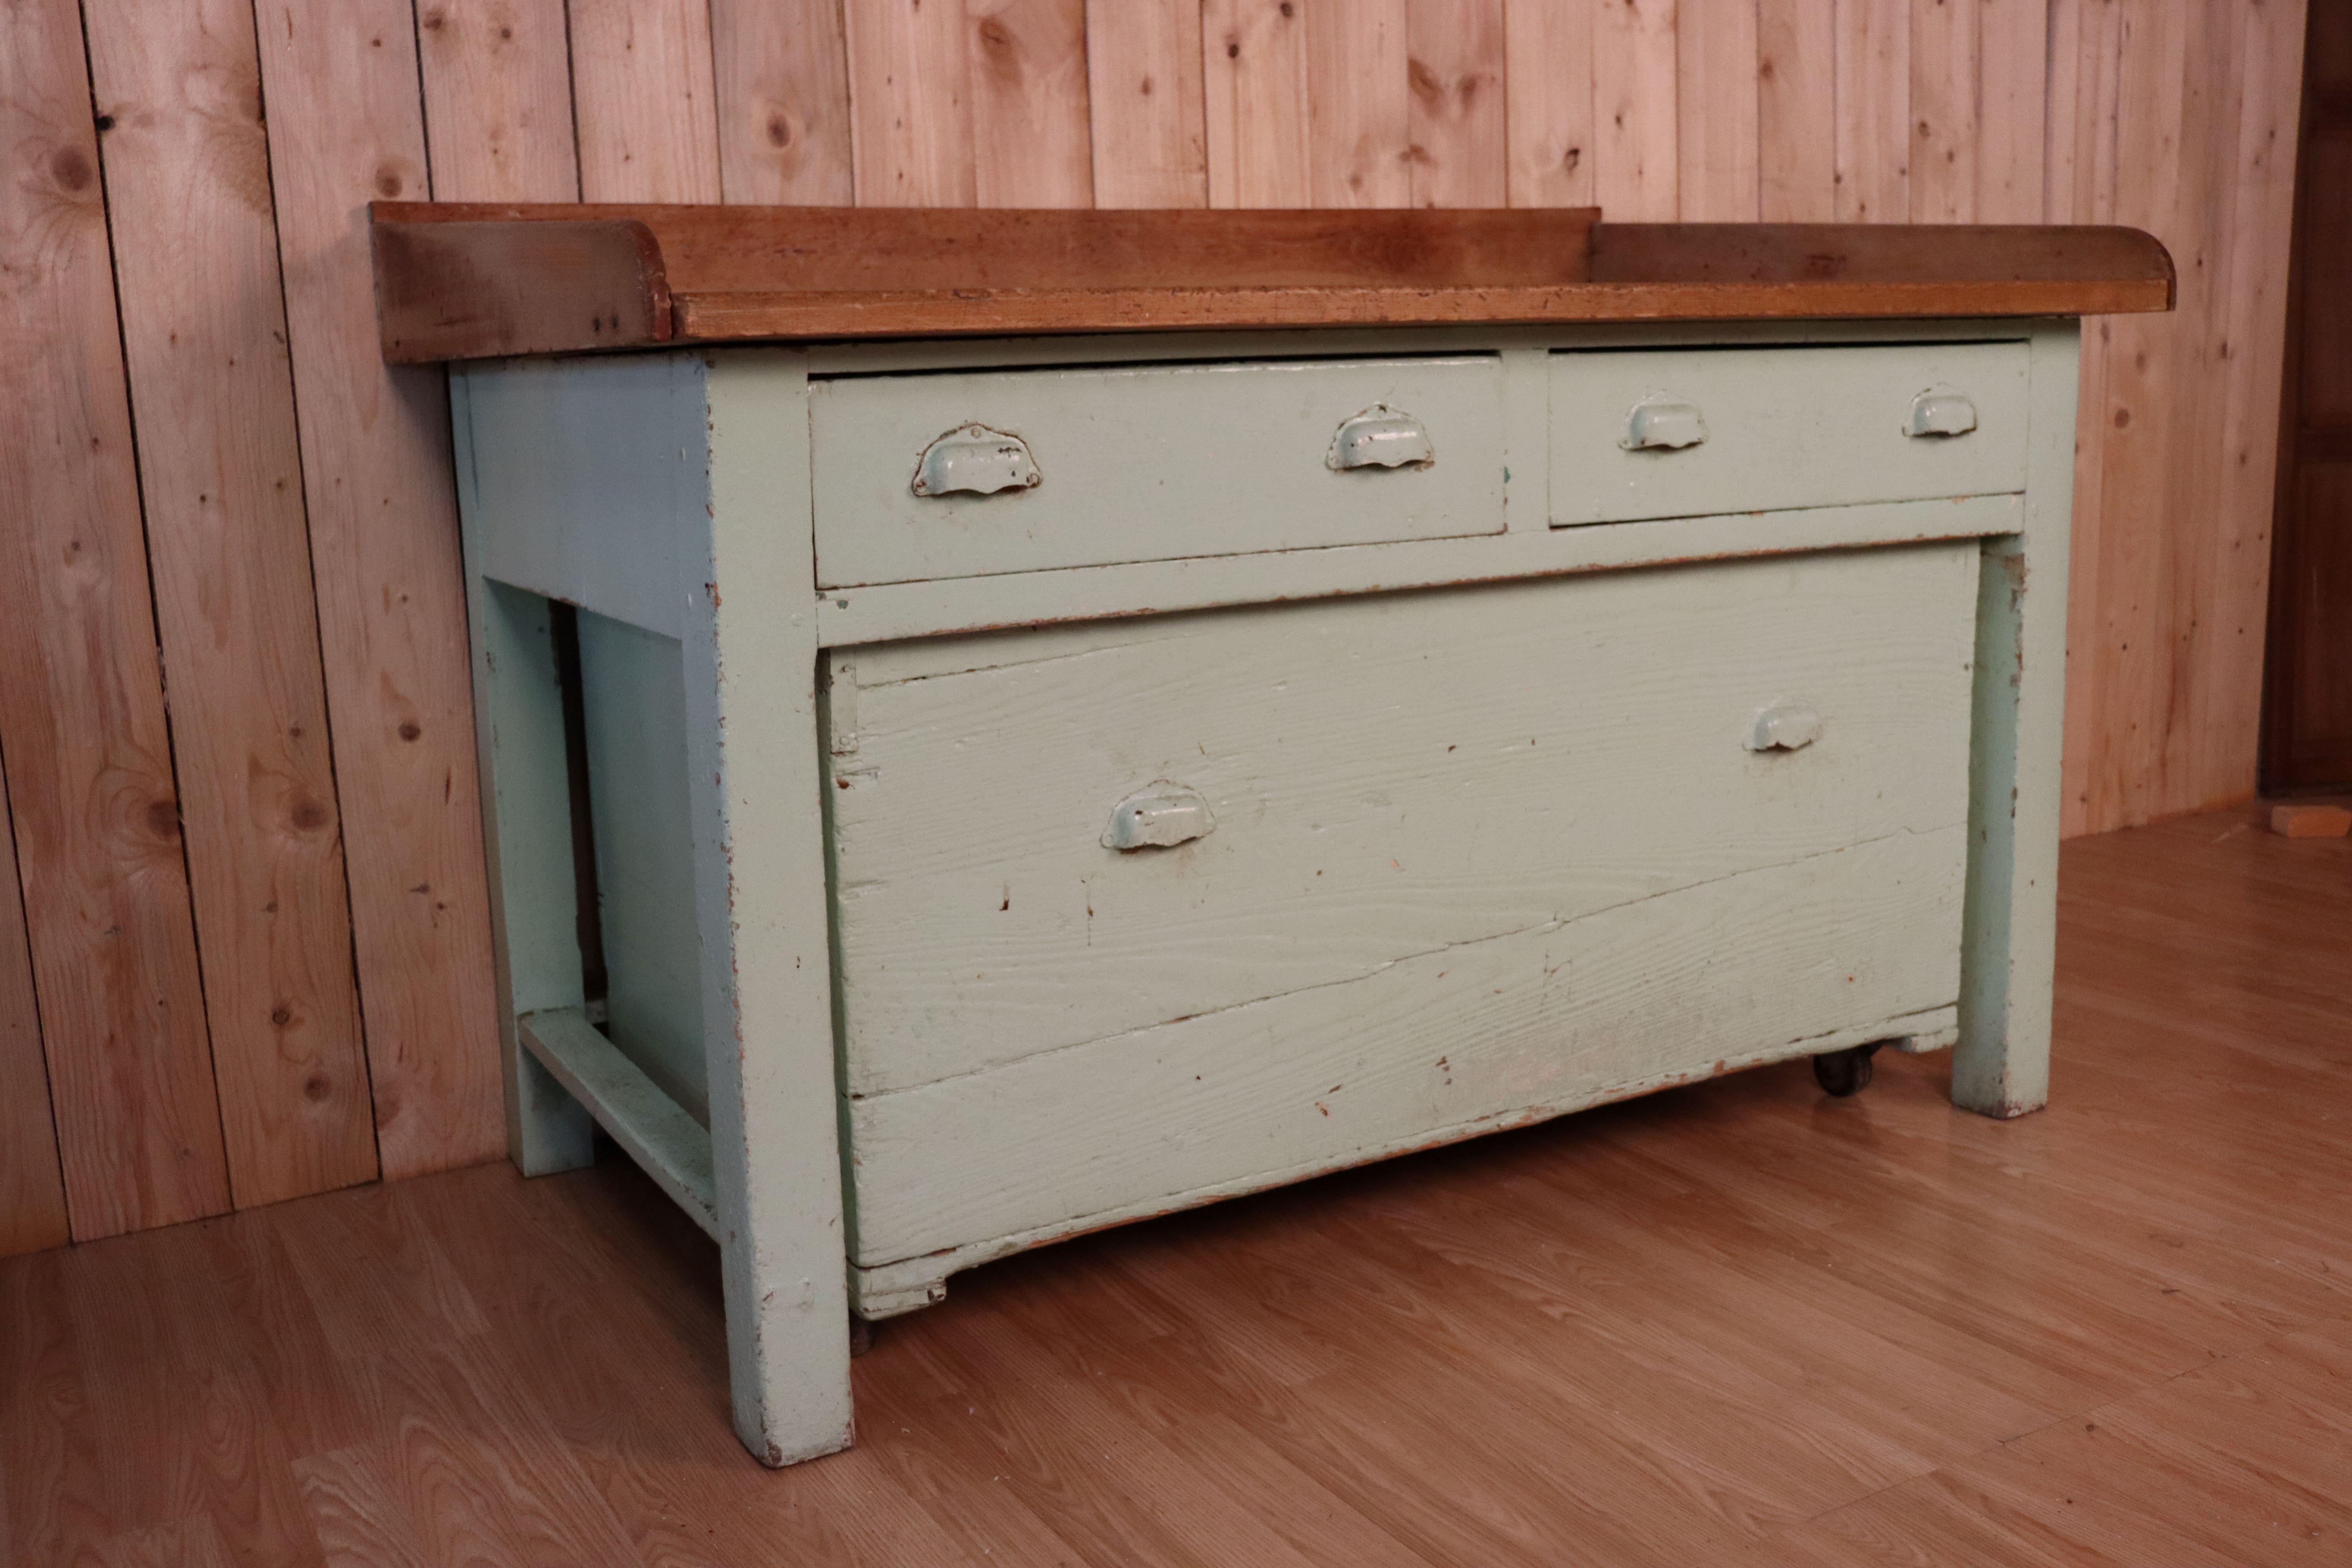 Old kitchen block from the 1950s, with its original patina (from a pastry laboratory) light green color furniture mounted on casters, two drawers and a box (also mounted on casters) below.